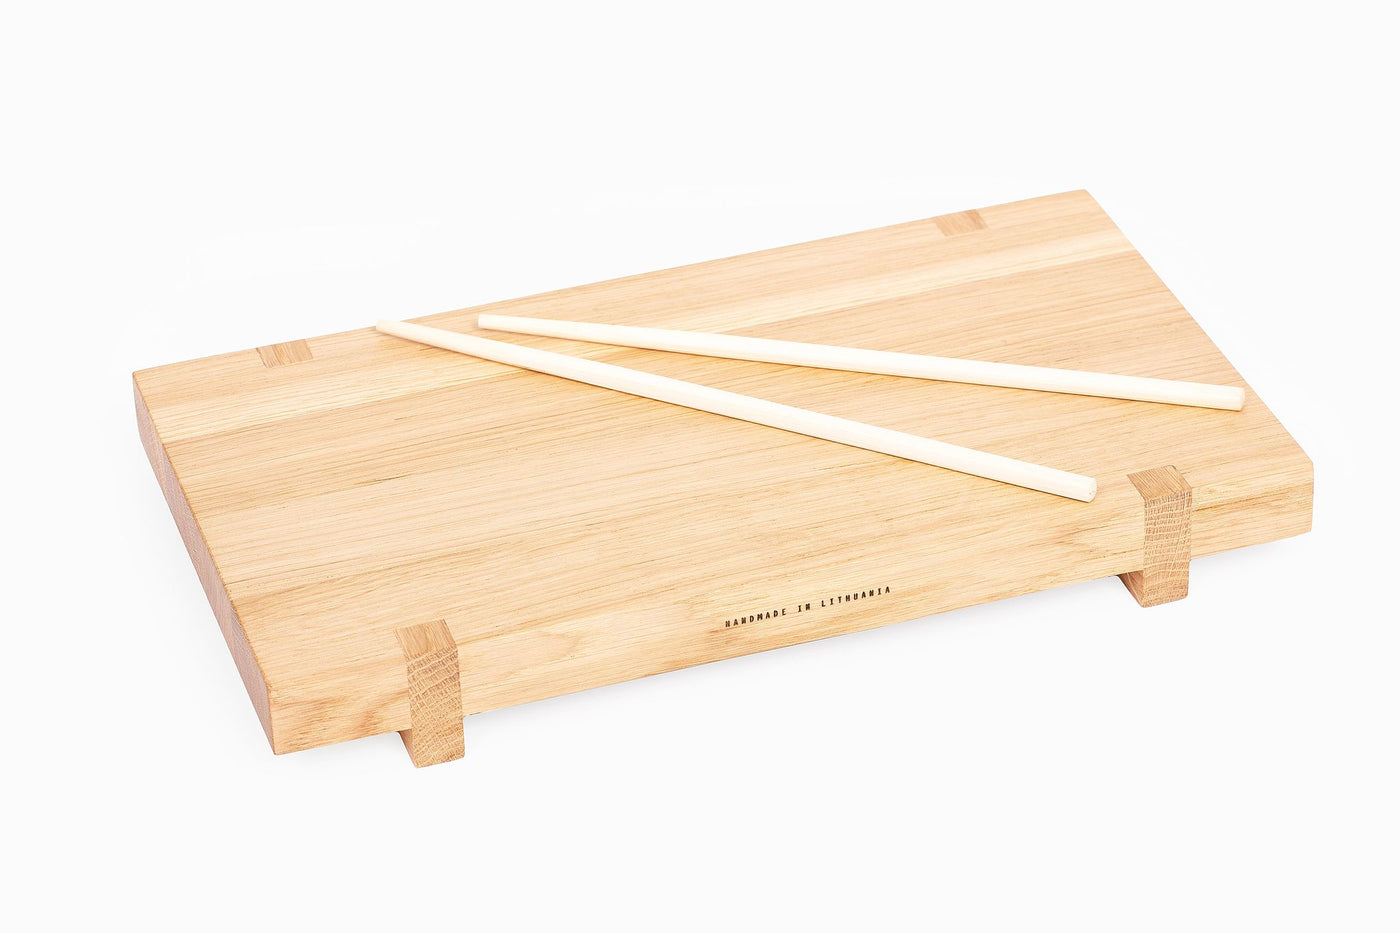 Mediena Sushi Serving Board-Home Goods-TRAYS / BOARDS-Forest Homes-Nature inspired decor-Nature decor